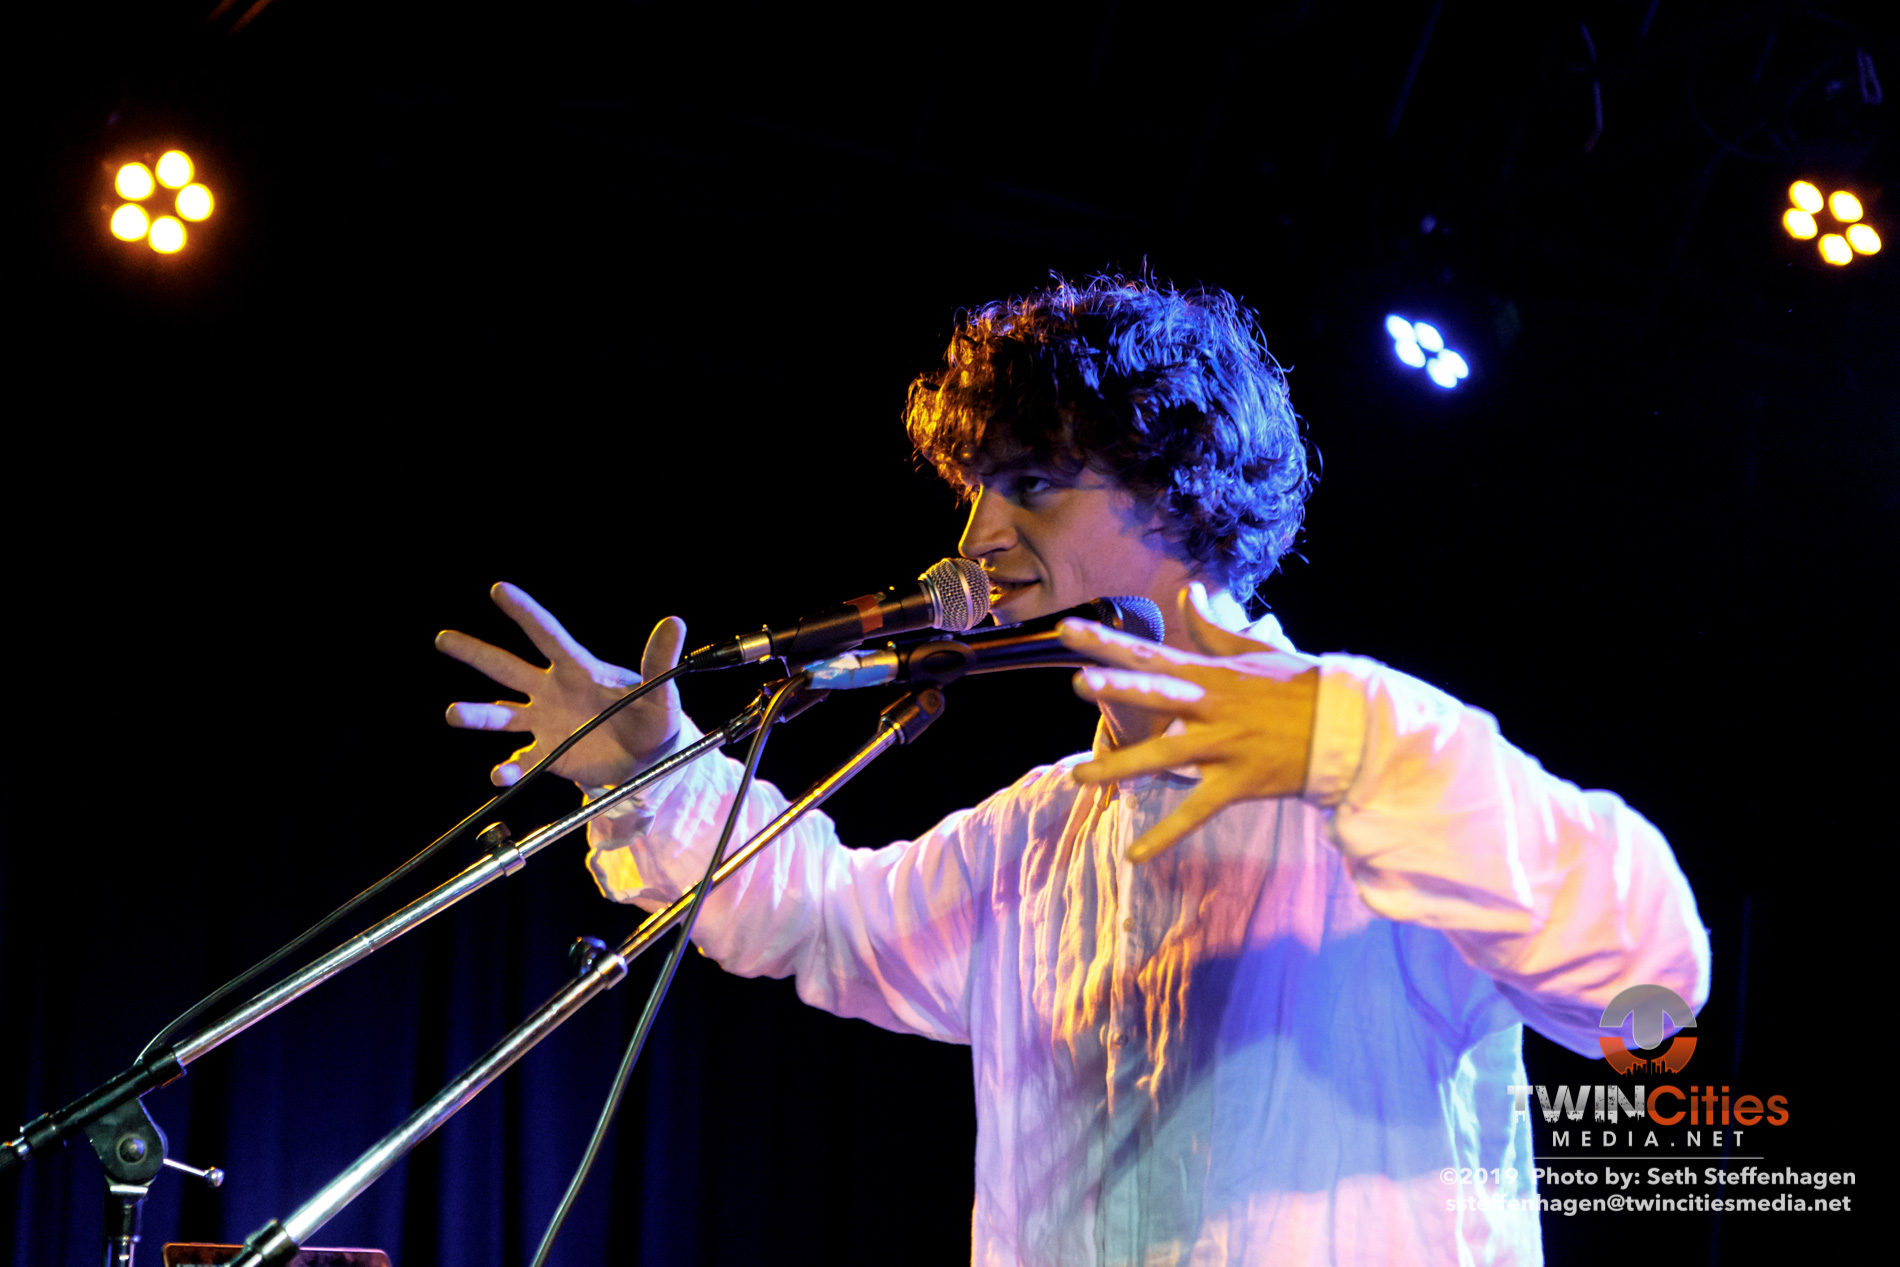 October 2, 2019 - Minneapolis, Minnesota, United States - Cosmo Sheldrake live in concert at the 7th Street Entry  along with altopalo as the openers.(Photo by Seth Steffenhagen/Steffenhagen Photography)